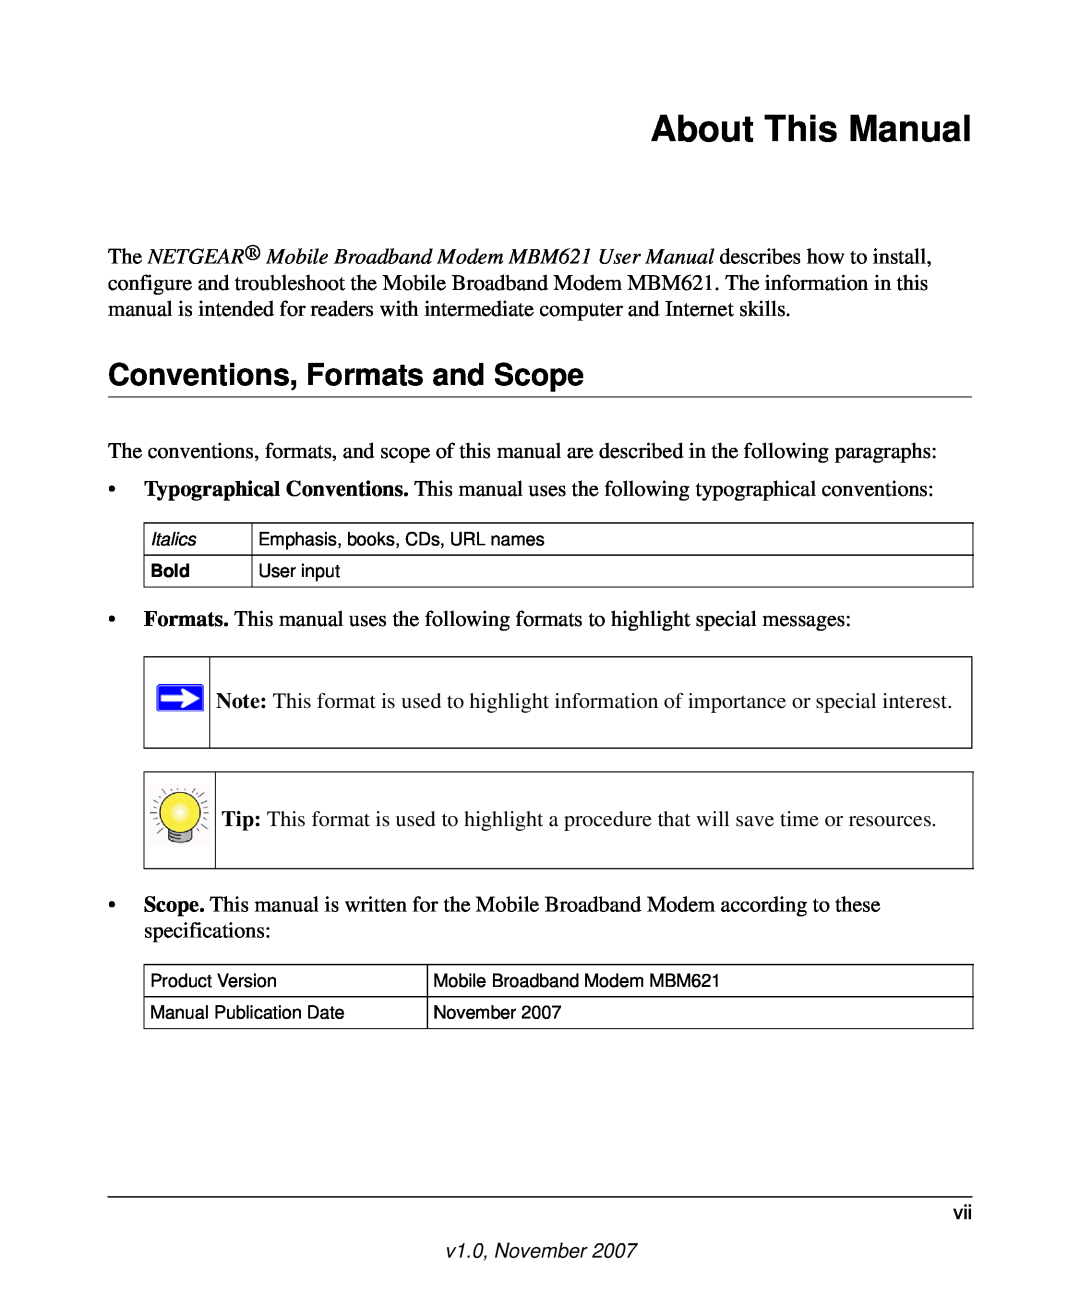 NETGEAR MBM621 user manual About This Manual, Conventions, Formats and Scope 